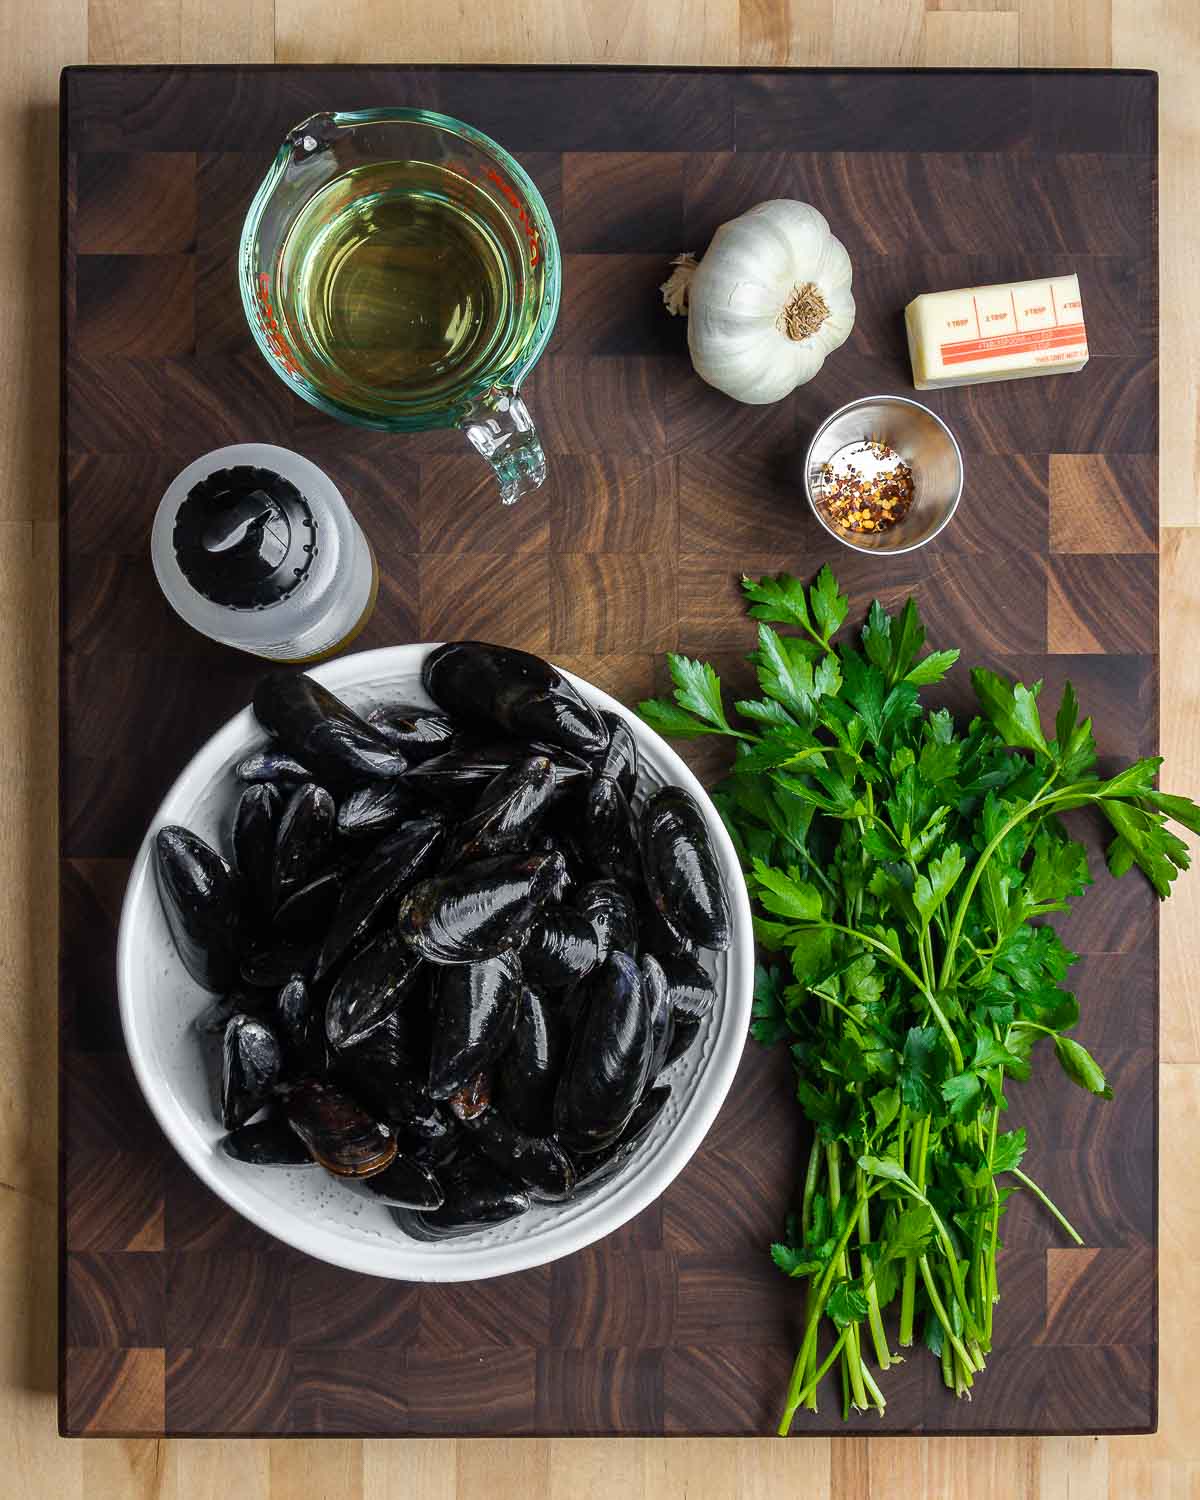 Ingredients shown: white wine, garlic, butter, olive oil, chili flakes, mussels, and parsley.